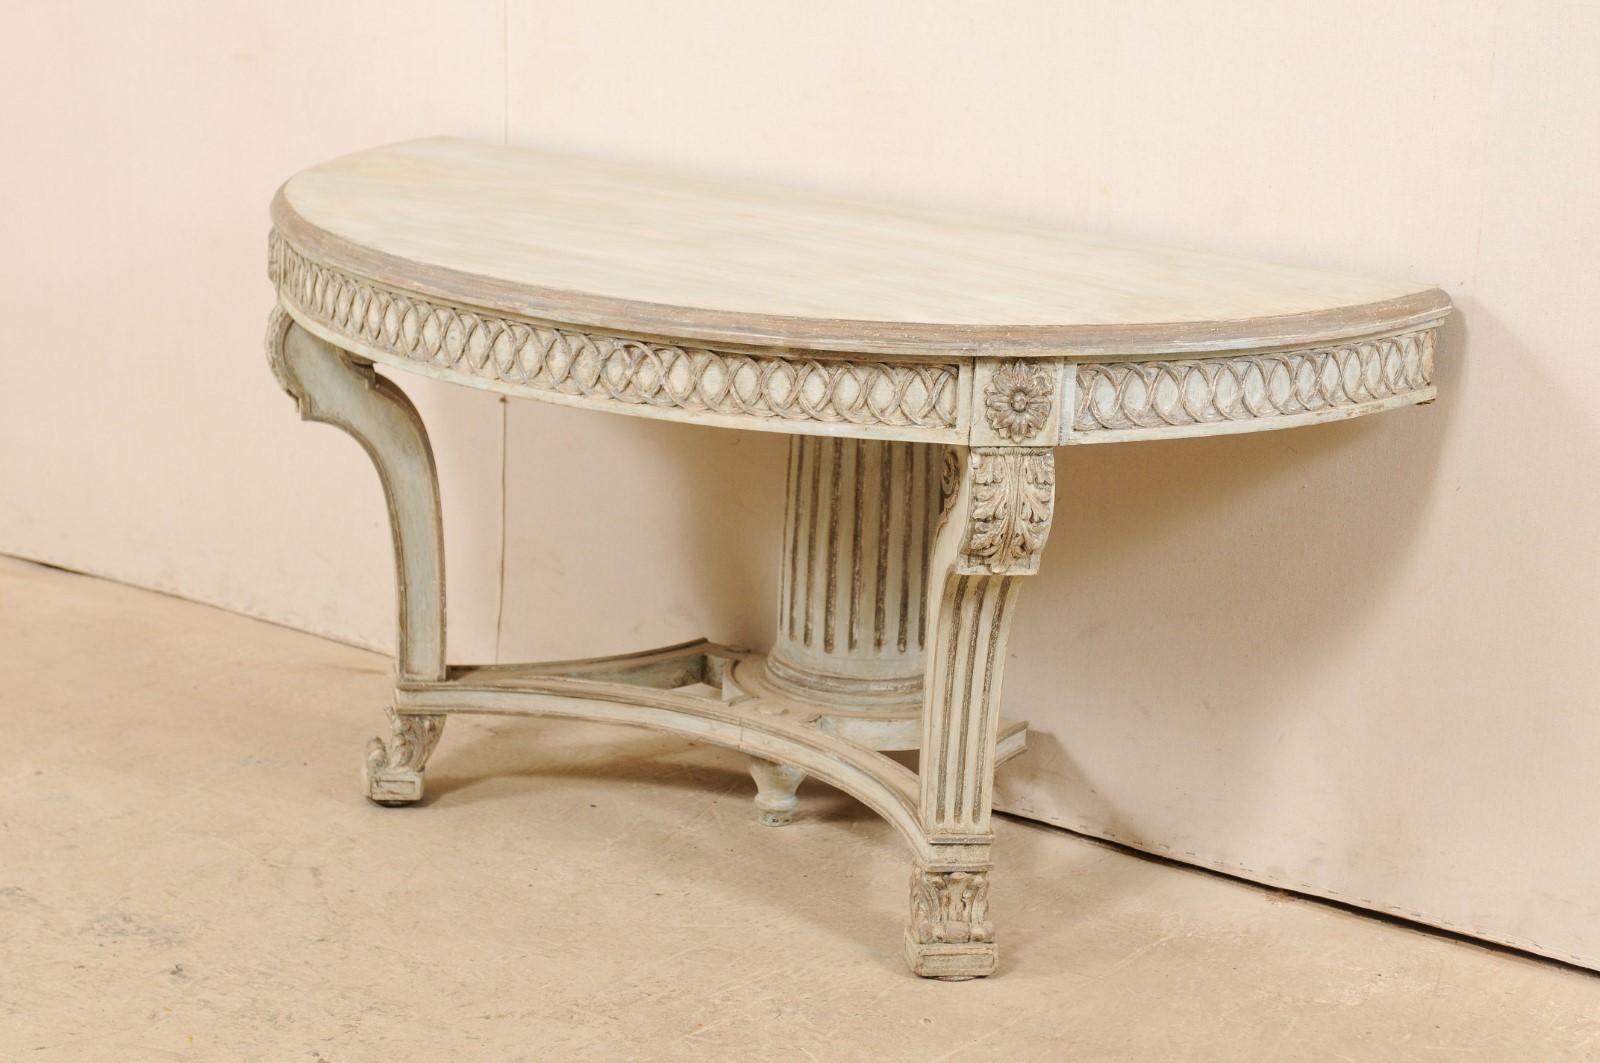 Italian Half-Round Nicely Carved Console Table from the Mid-20th Century In Good Condition For Sale In Atlanta, GA